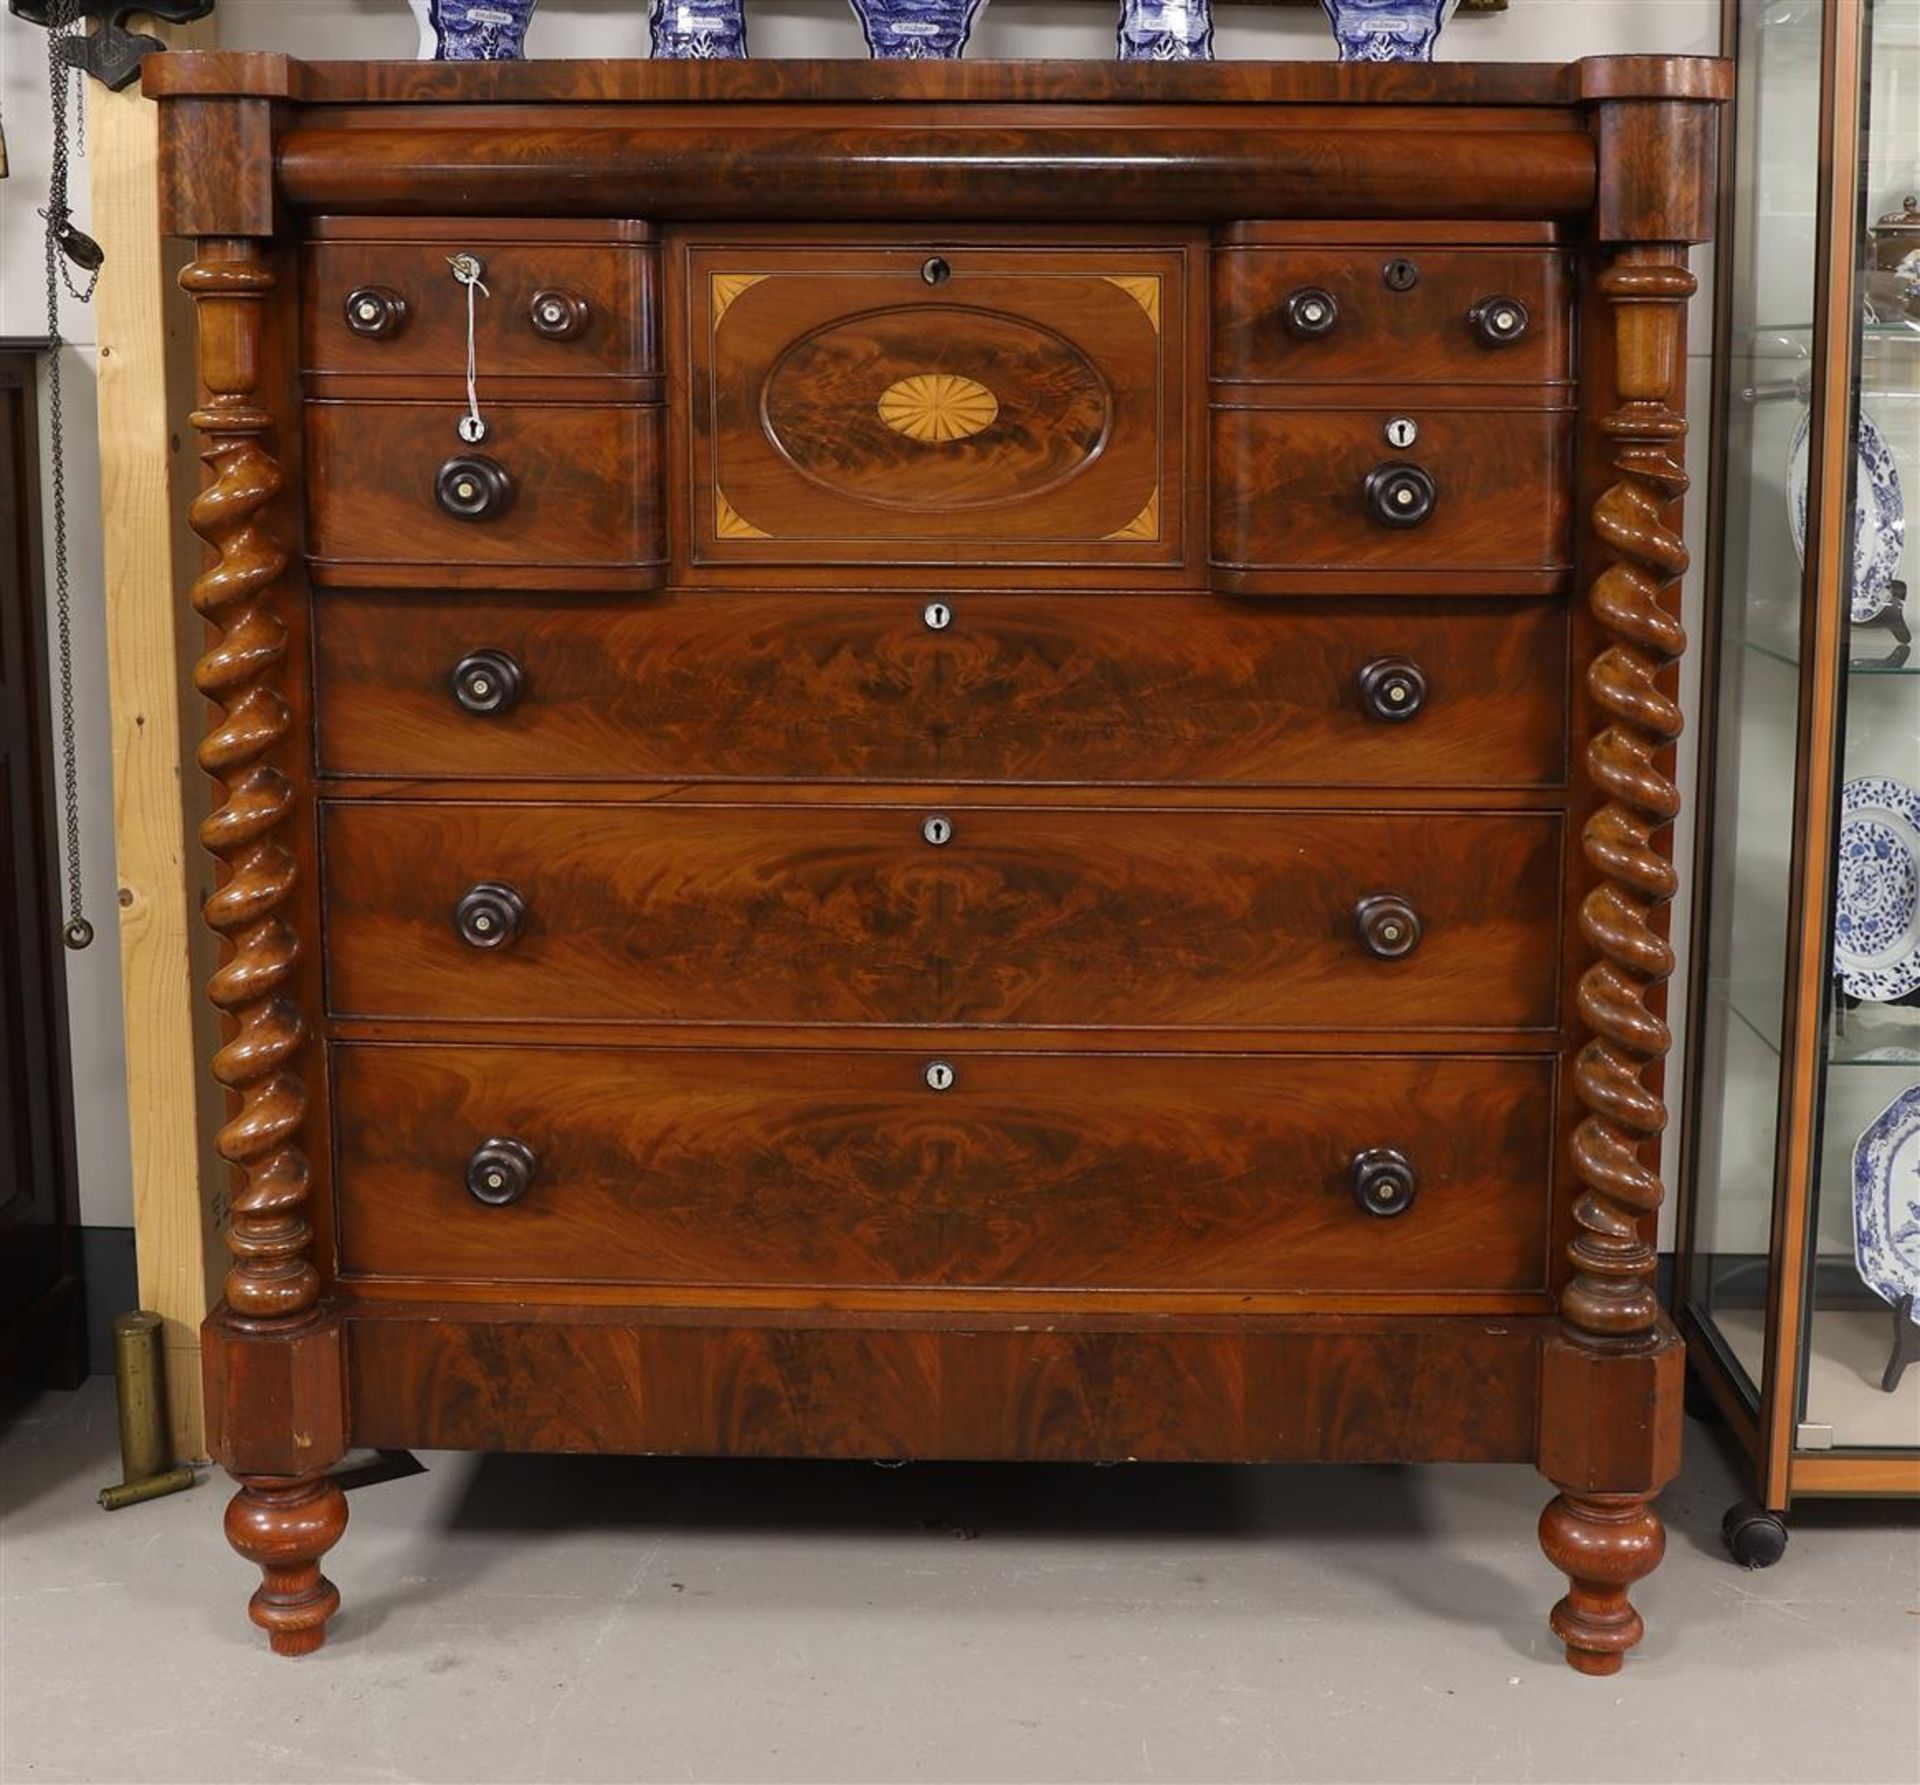 A chest of drawers, England, early 19th century.